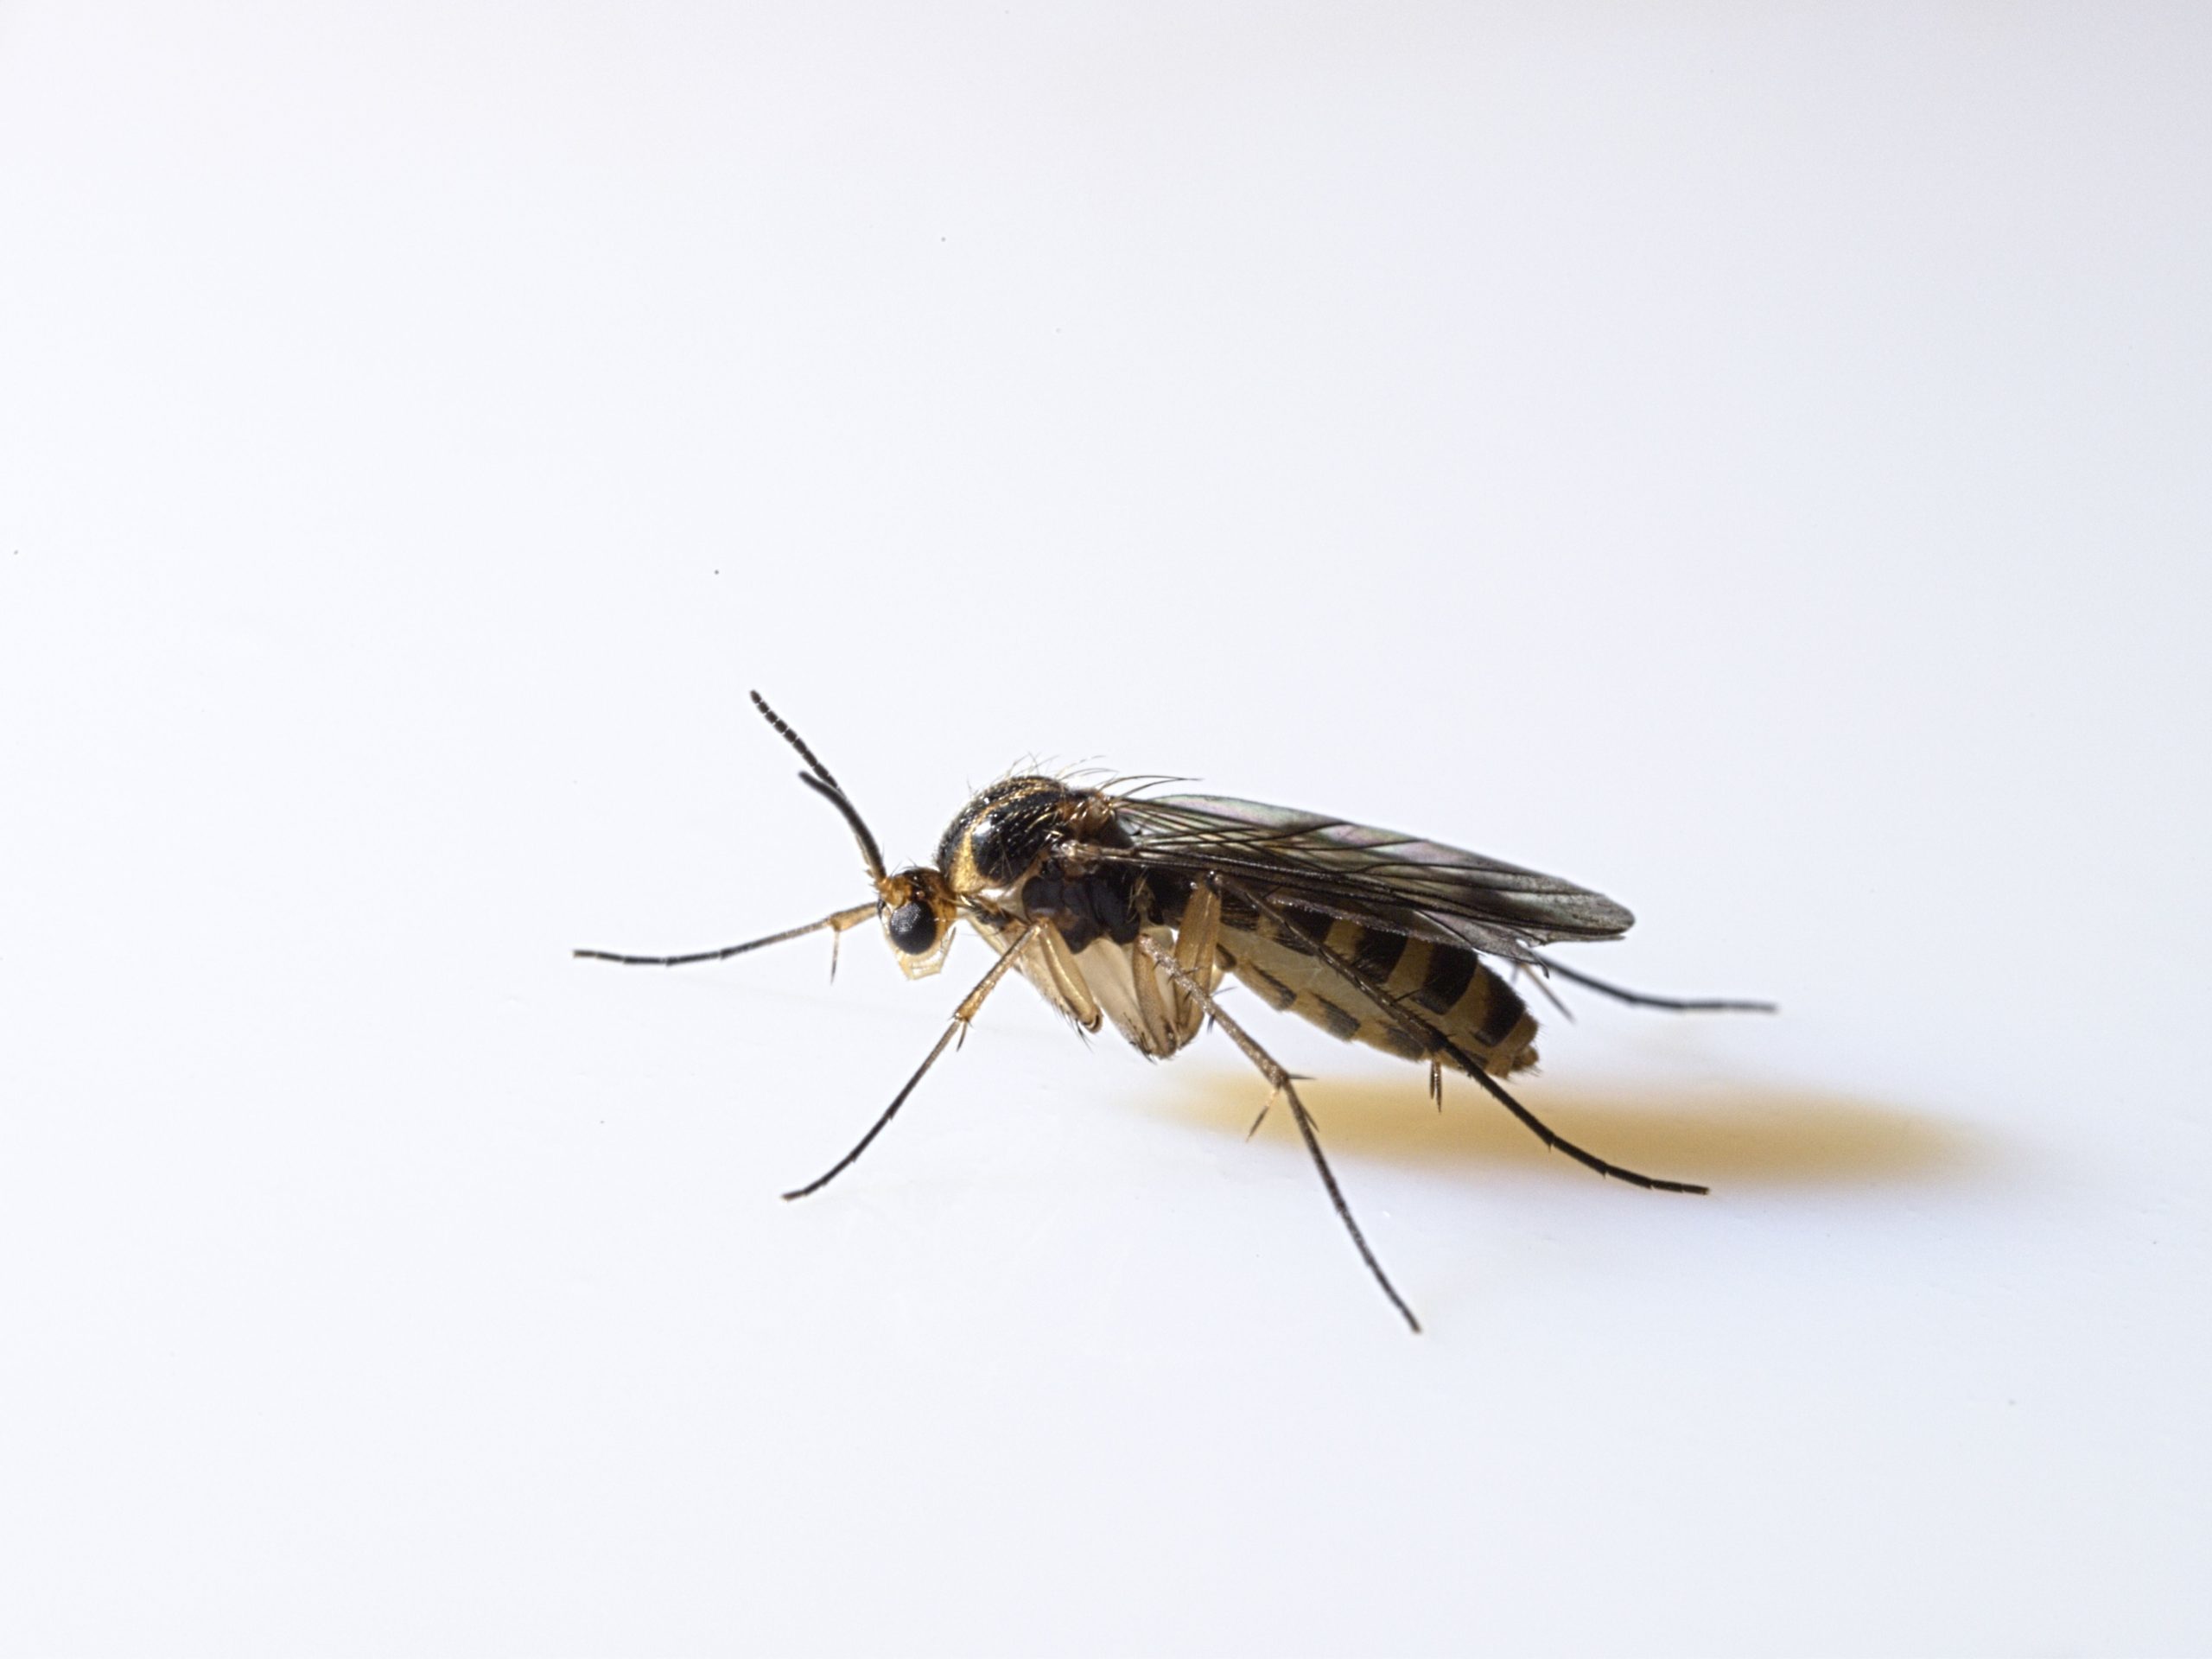 What Do I Know?: Tiny Black Bugs - Fruit Flies or Fungus Gnats?